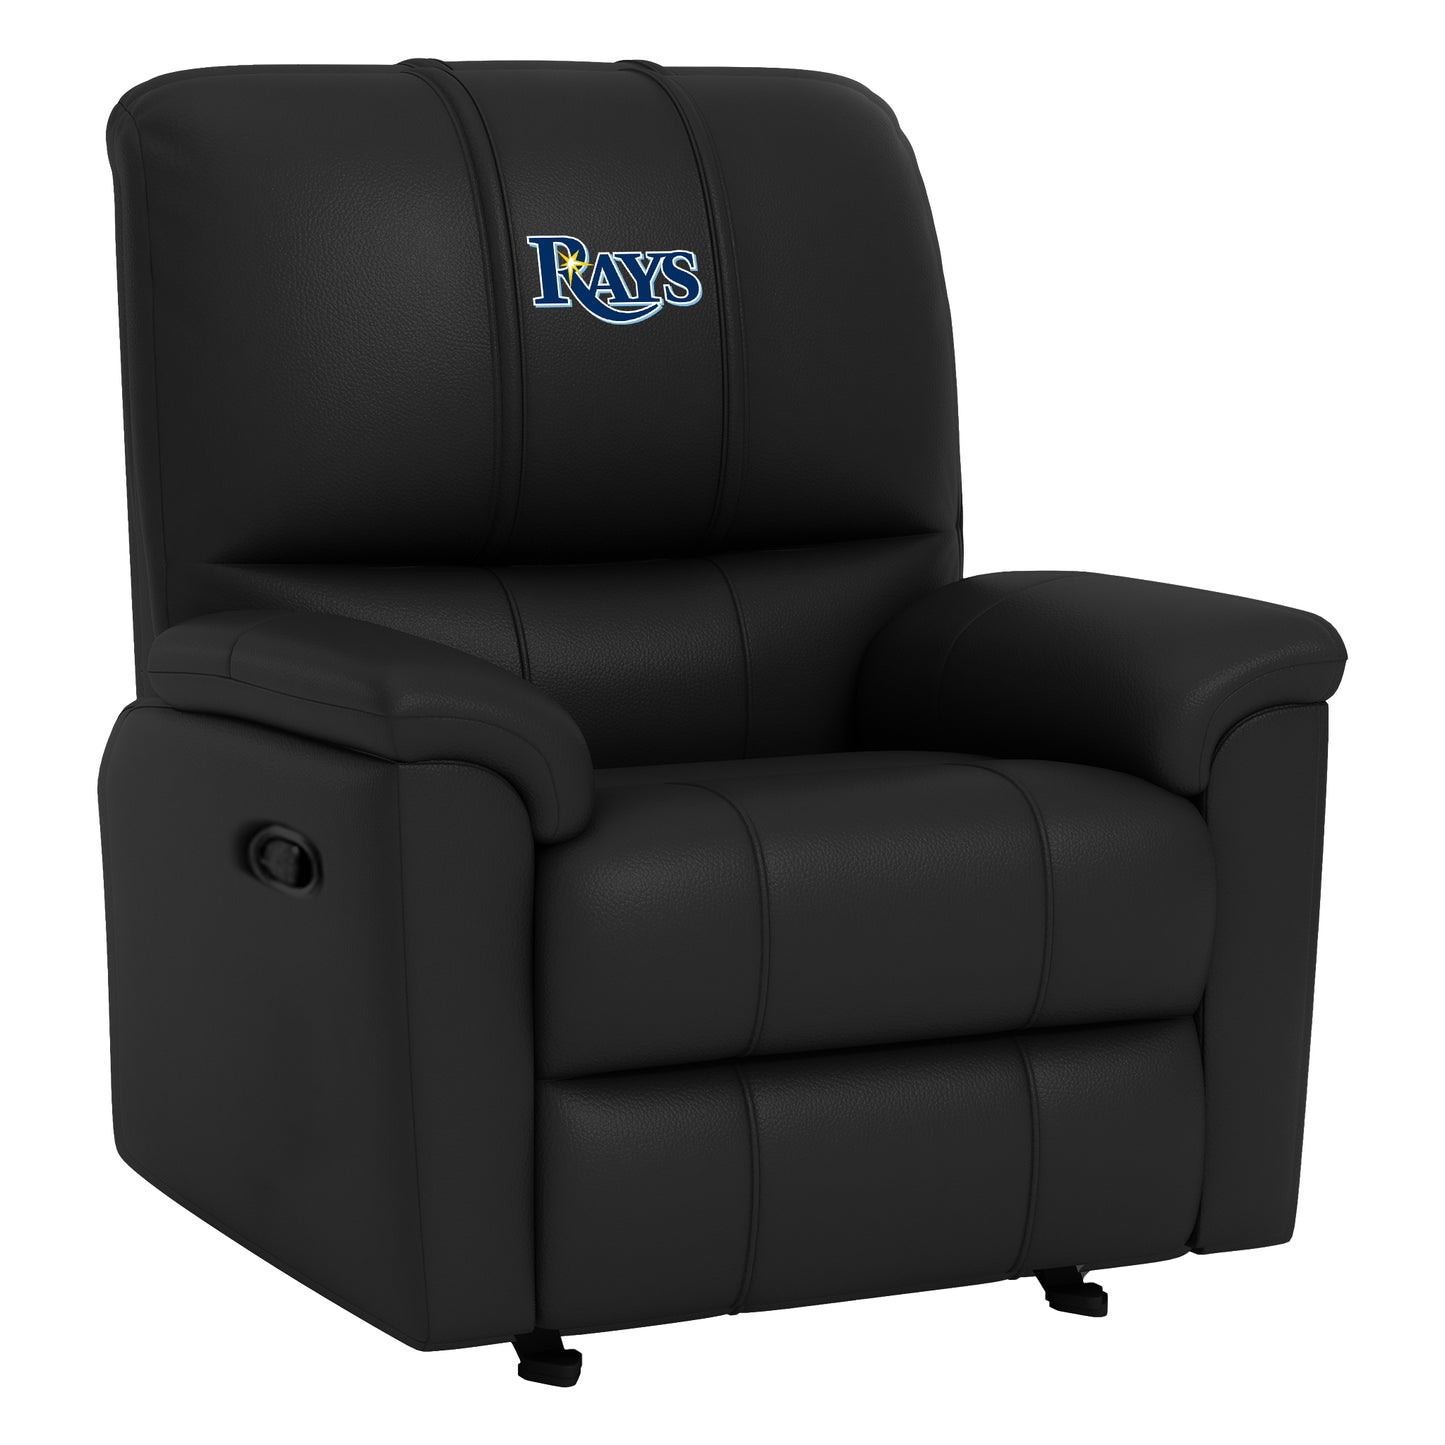 Rocker Recliner with Tampa Bay Rays Logo